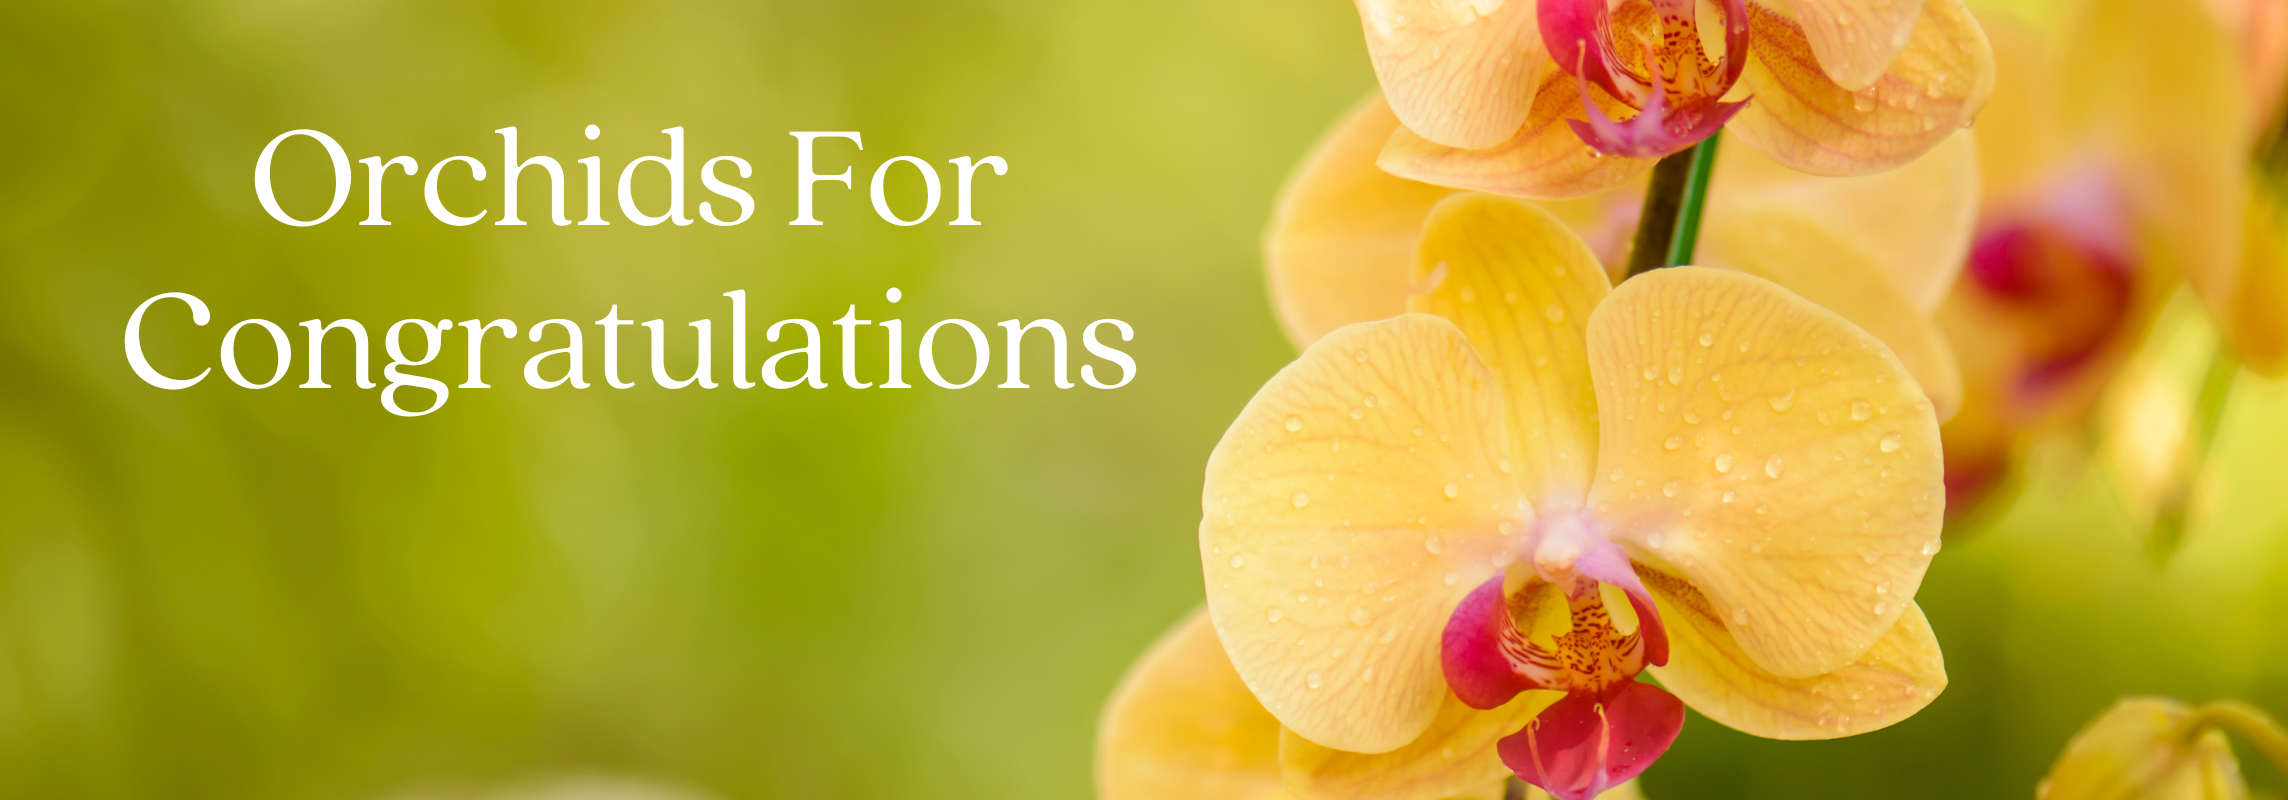 orchids for congratulations